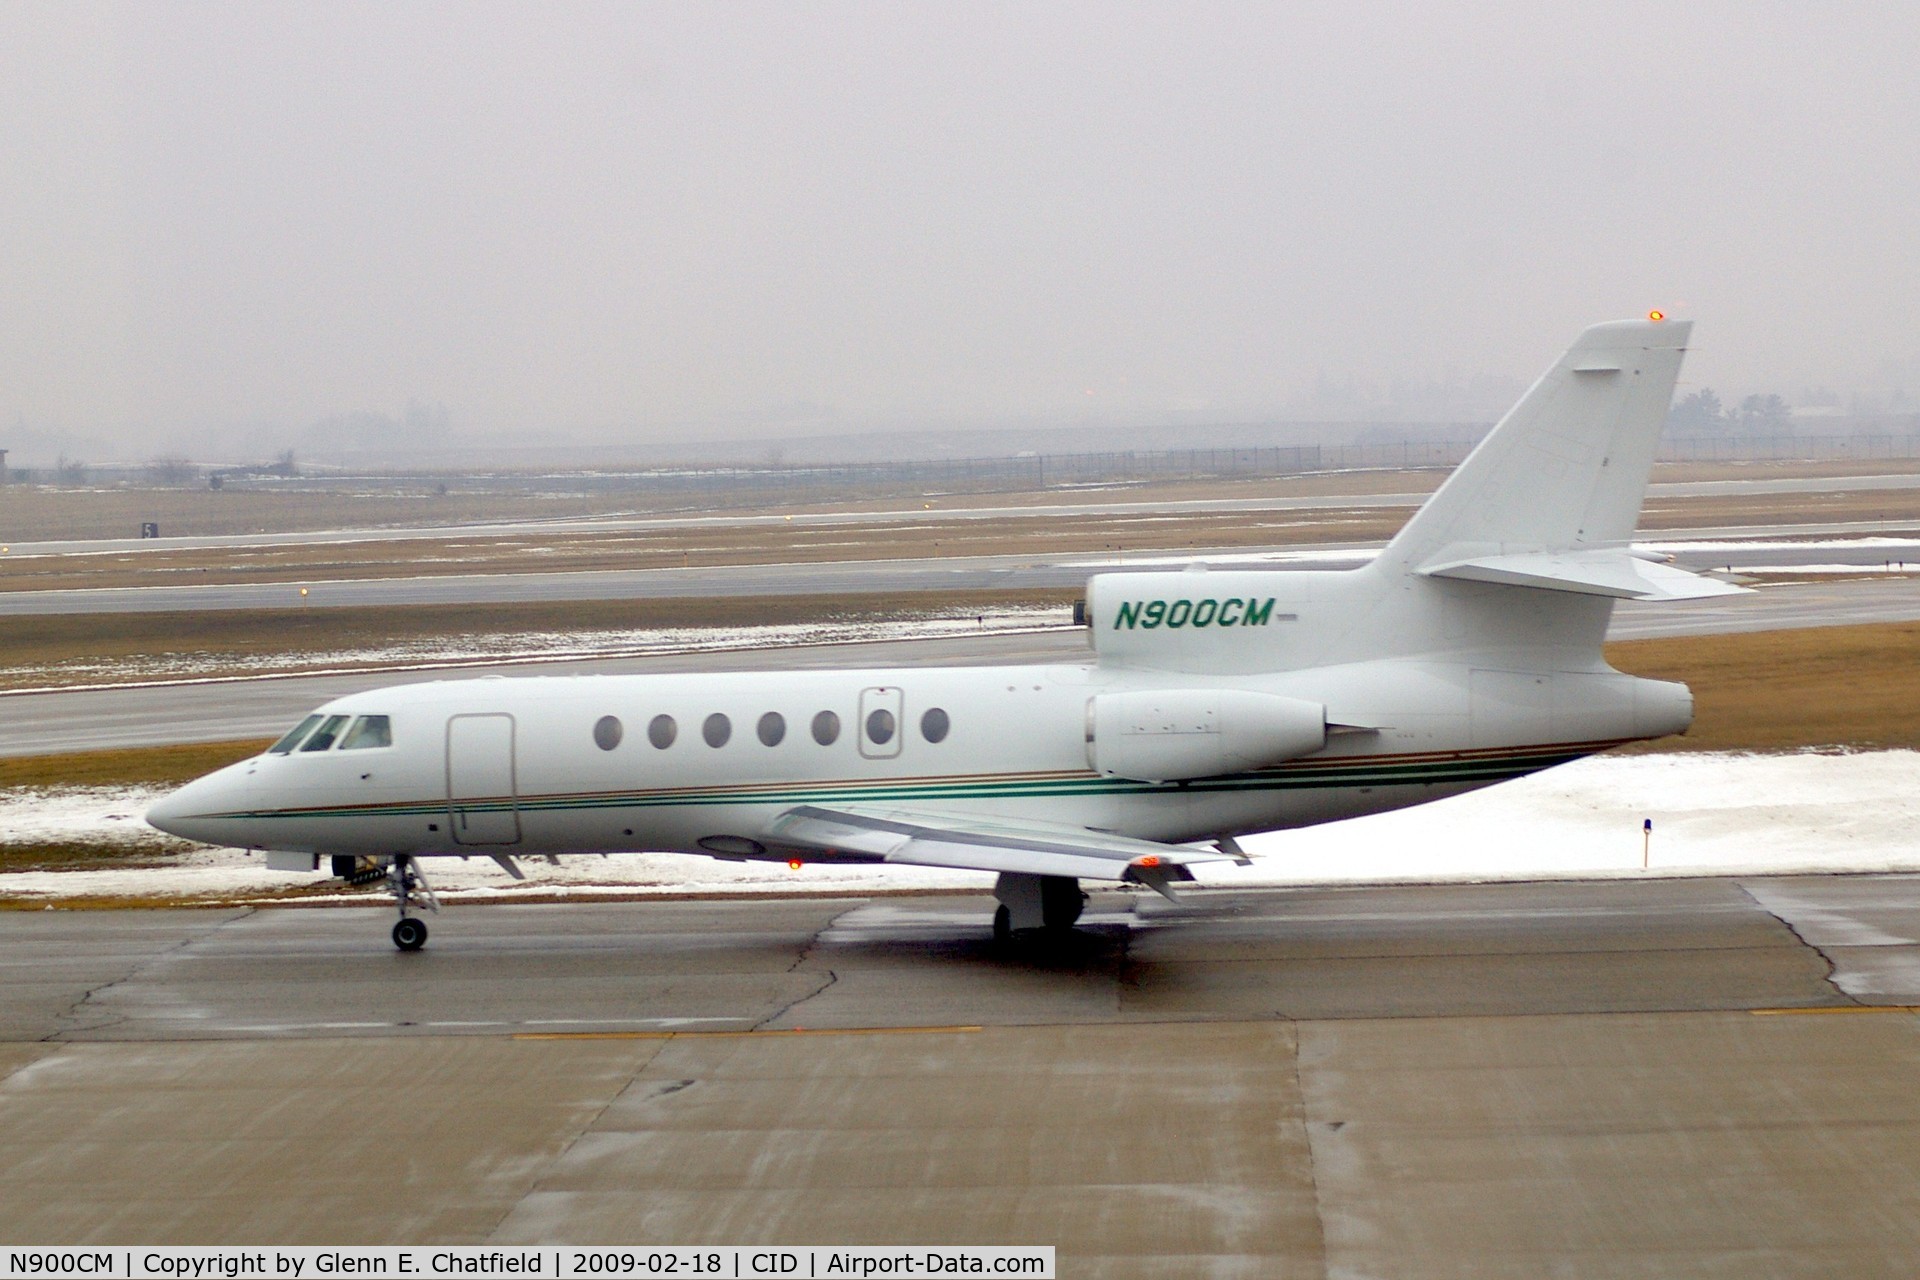 N900CM, 2002 Dassault Mystere Falcon 50 C/N 321, Taxiing from Landmark to Runway 27 for departure, in drizzle